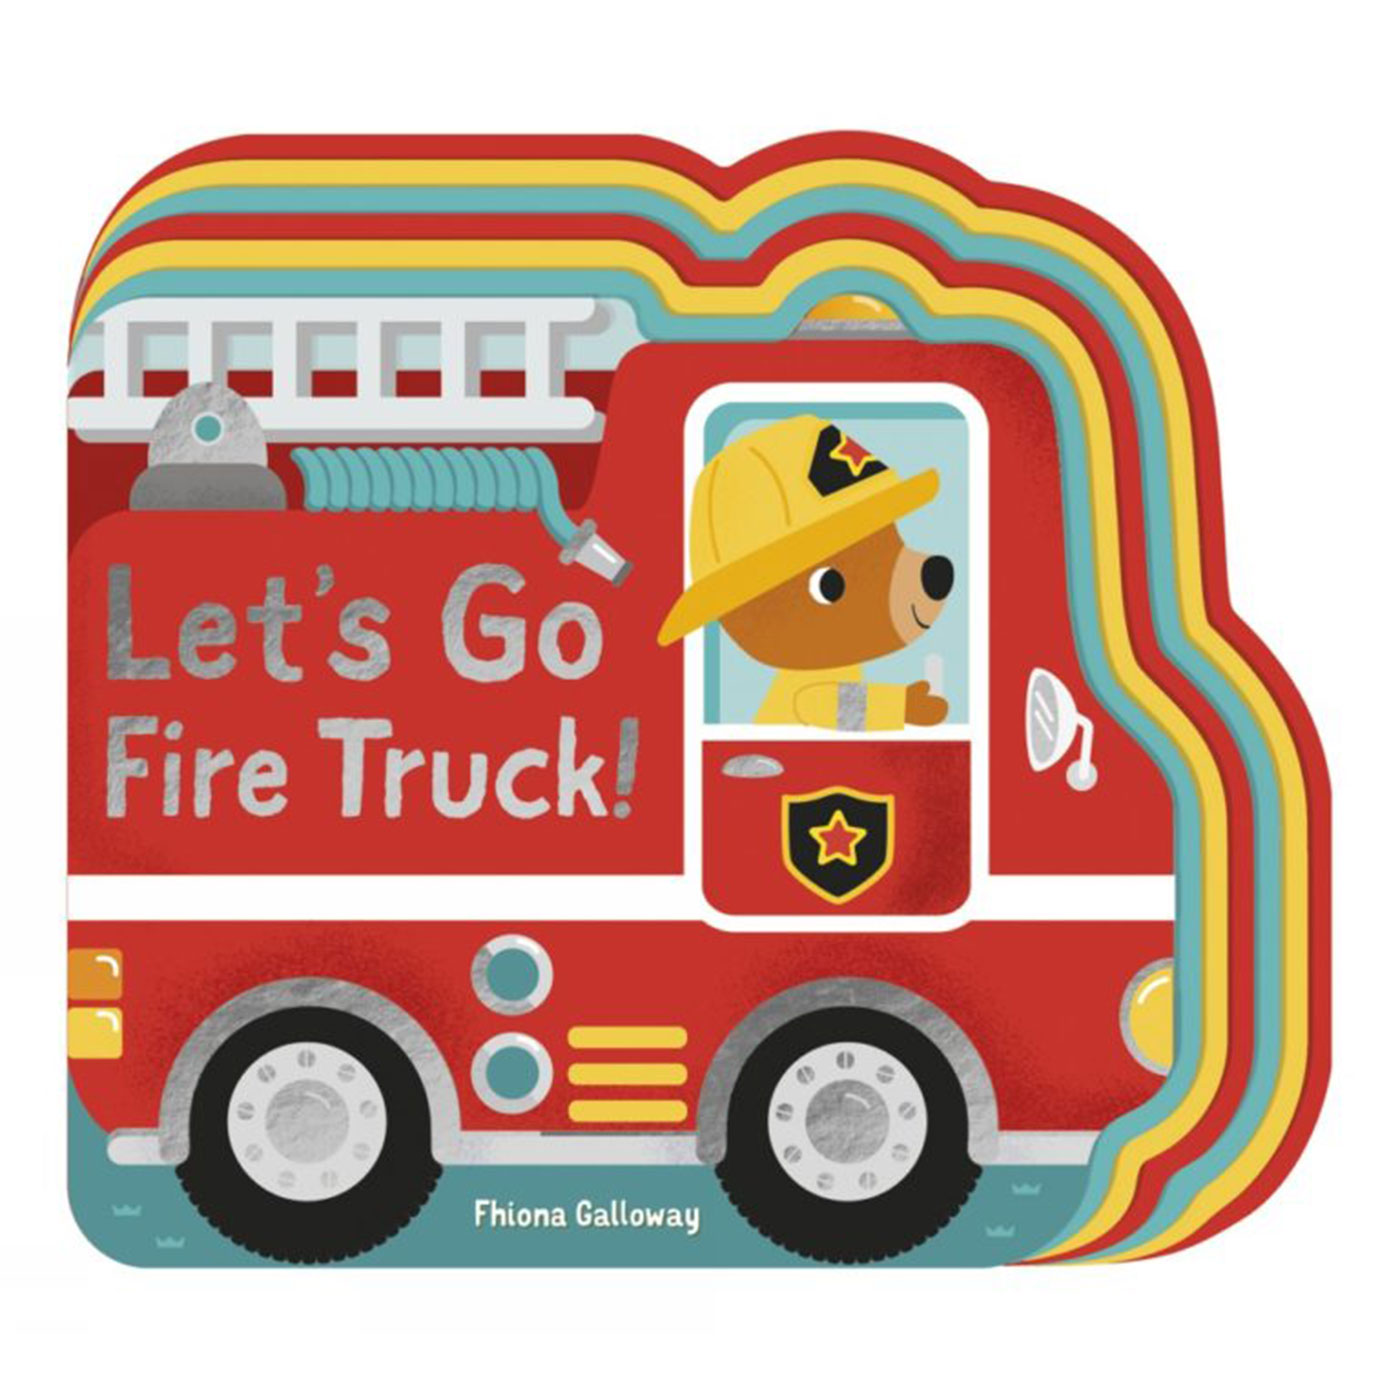  Let’s Go, Fire Truck!